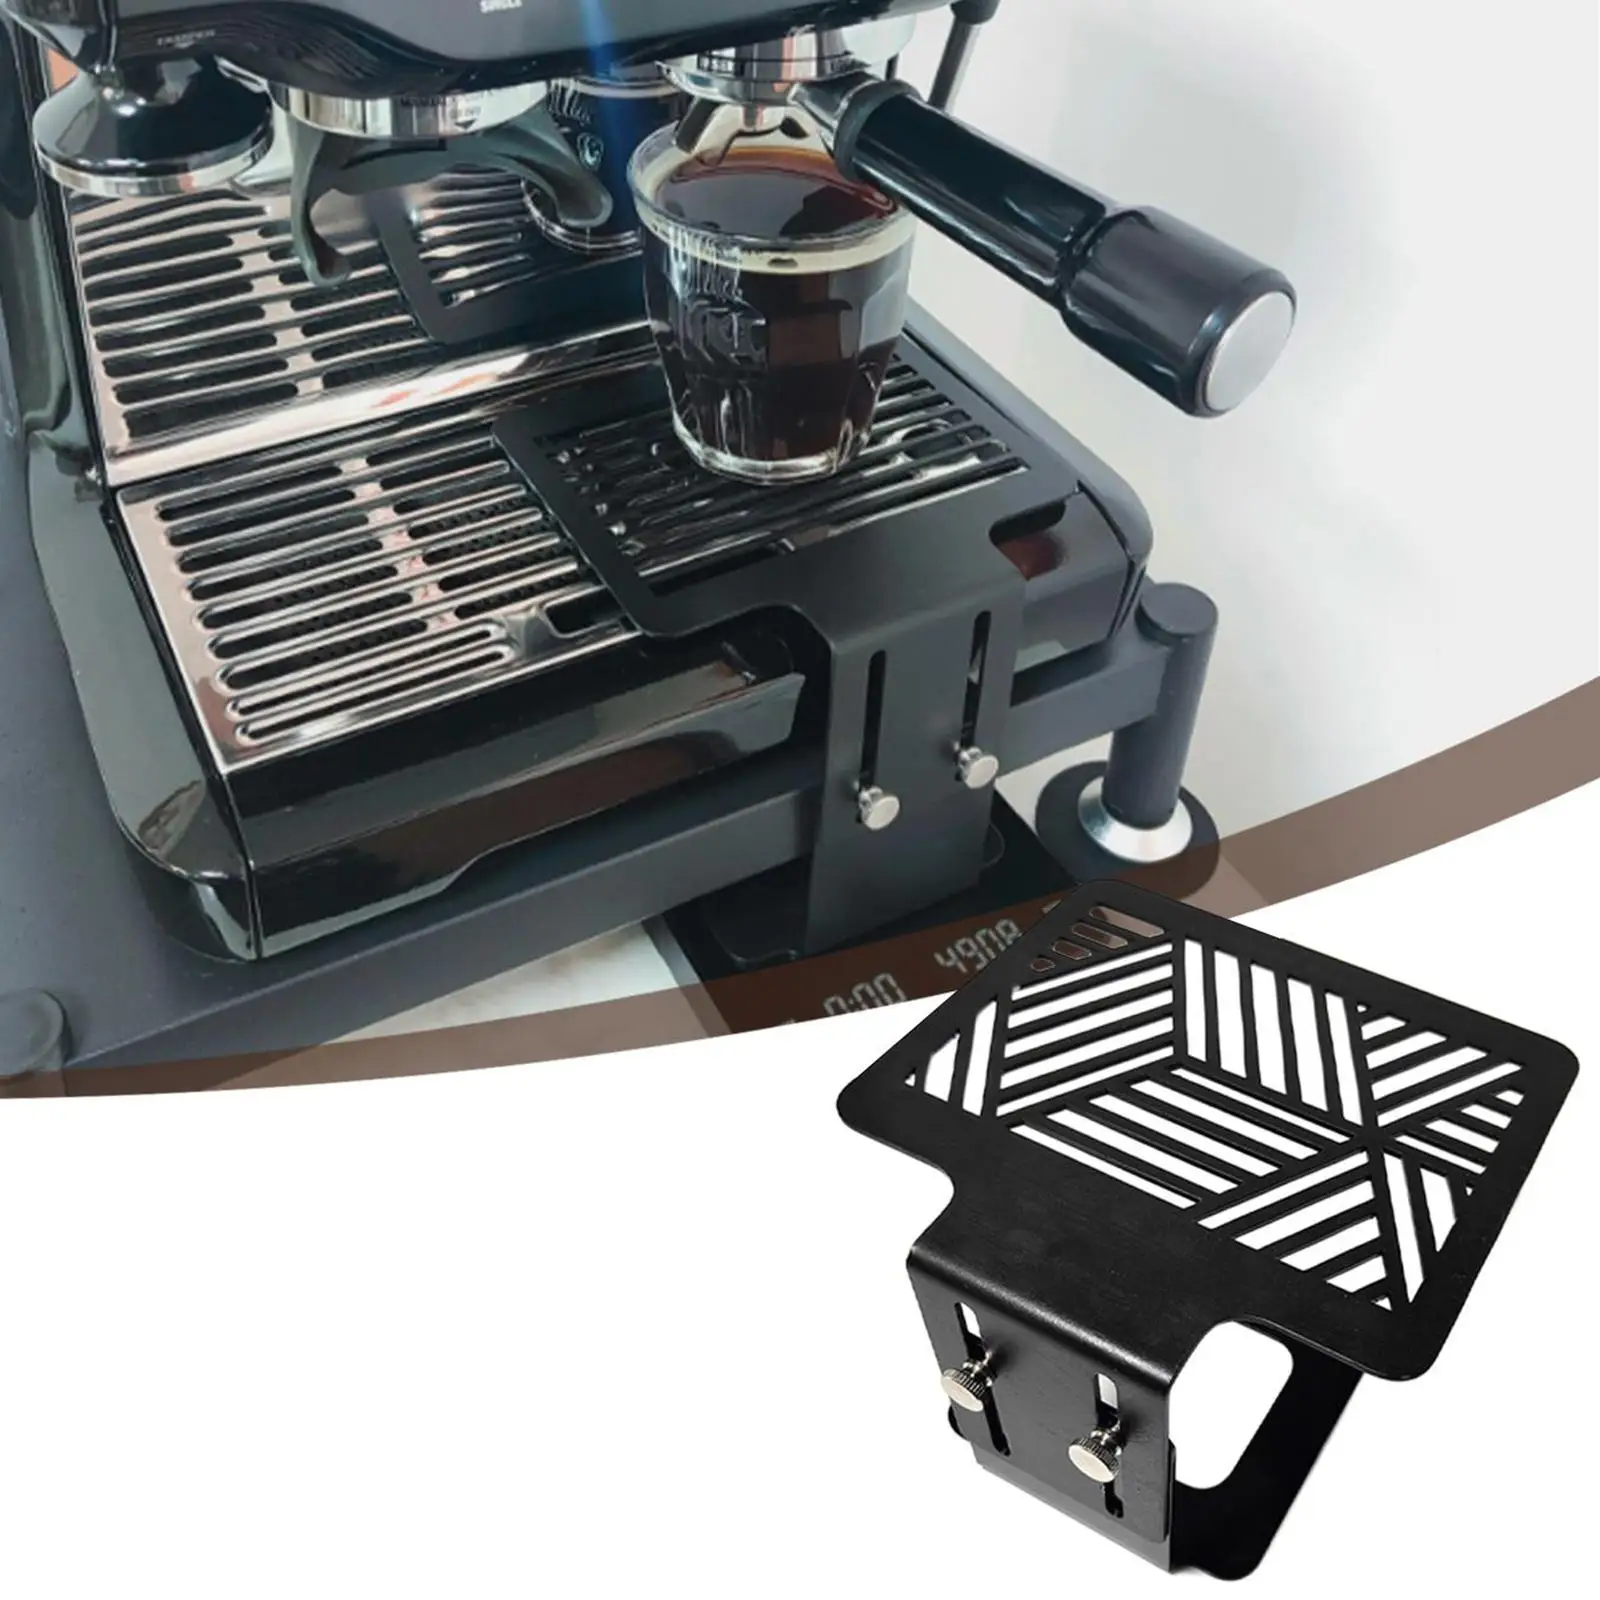 Adjustable Machine Scales Coffee Electronic Scale Electronic Coffee Weighing Stand for Home Family